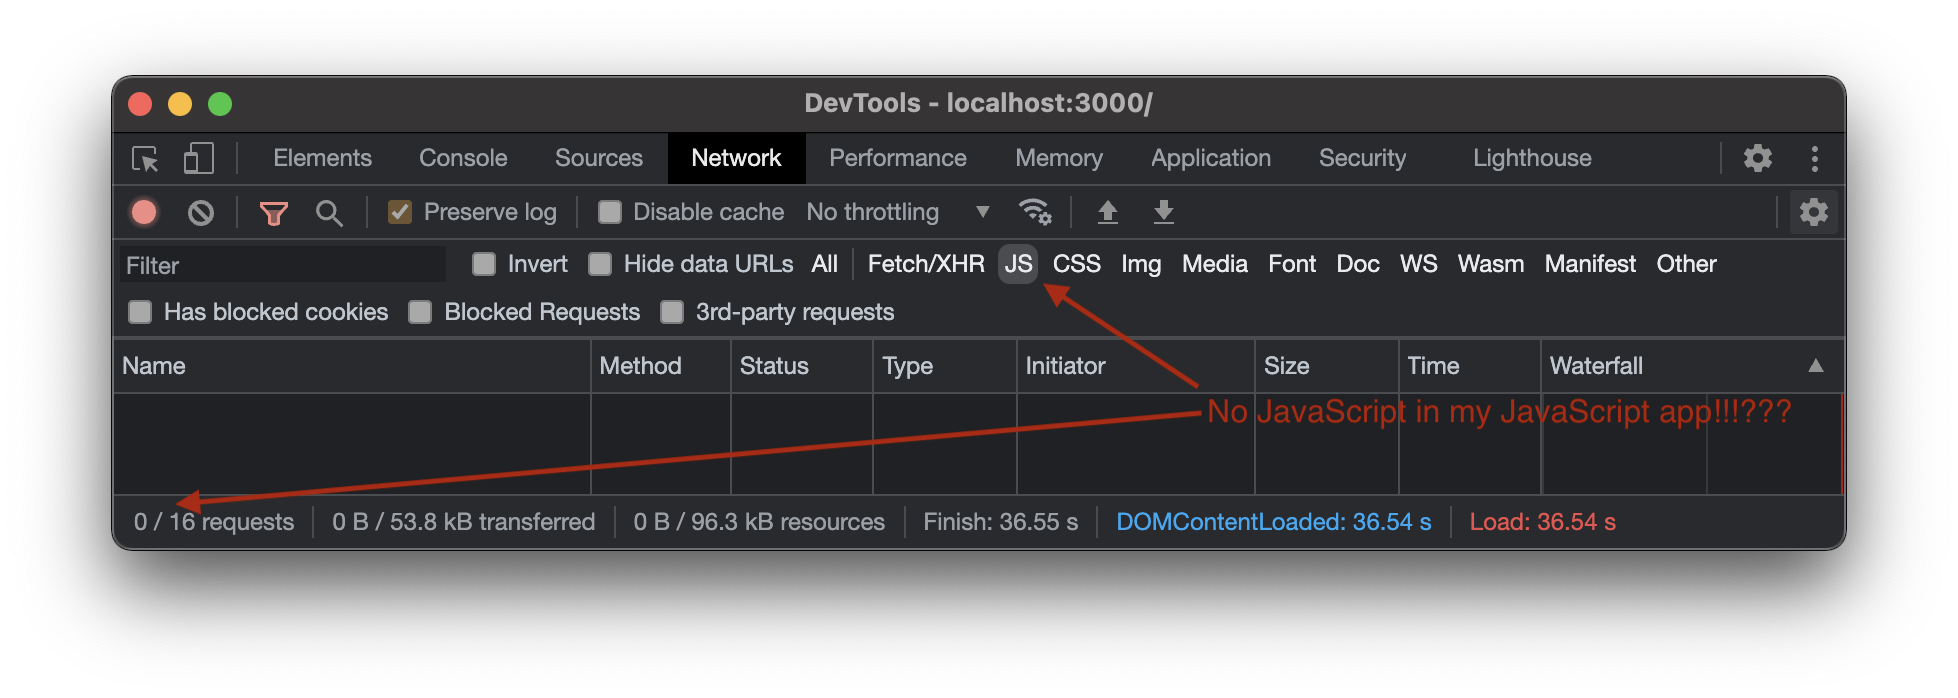 Network tab indicating no JavaScript is loaded